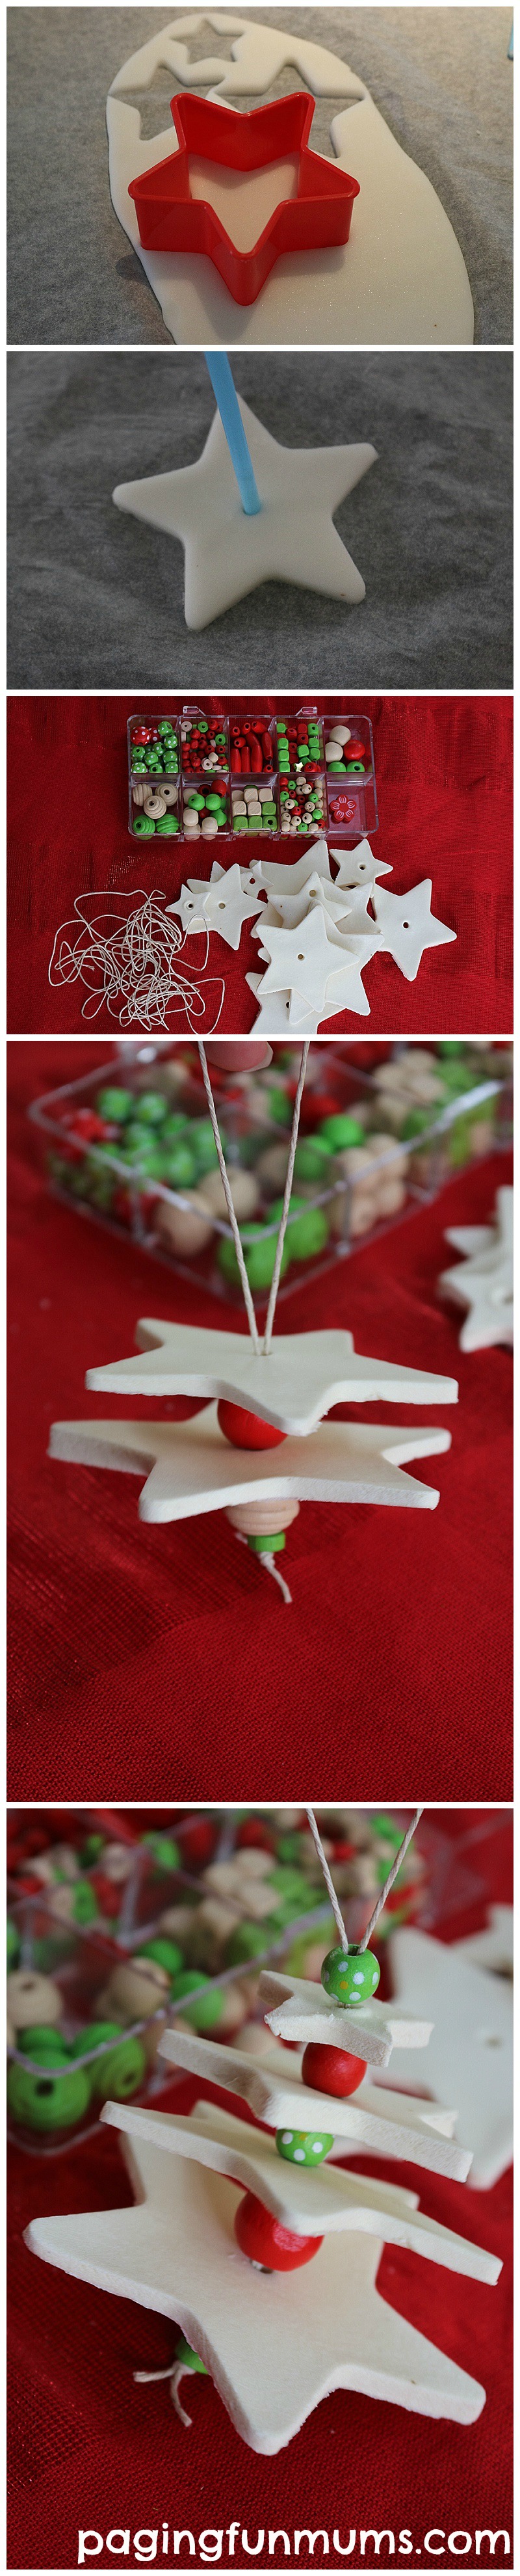 Clay Christmas Tree Craft perfect to do with children - made using homemade clay!